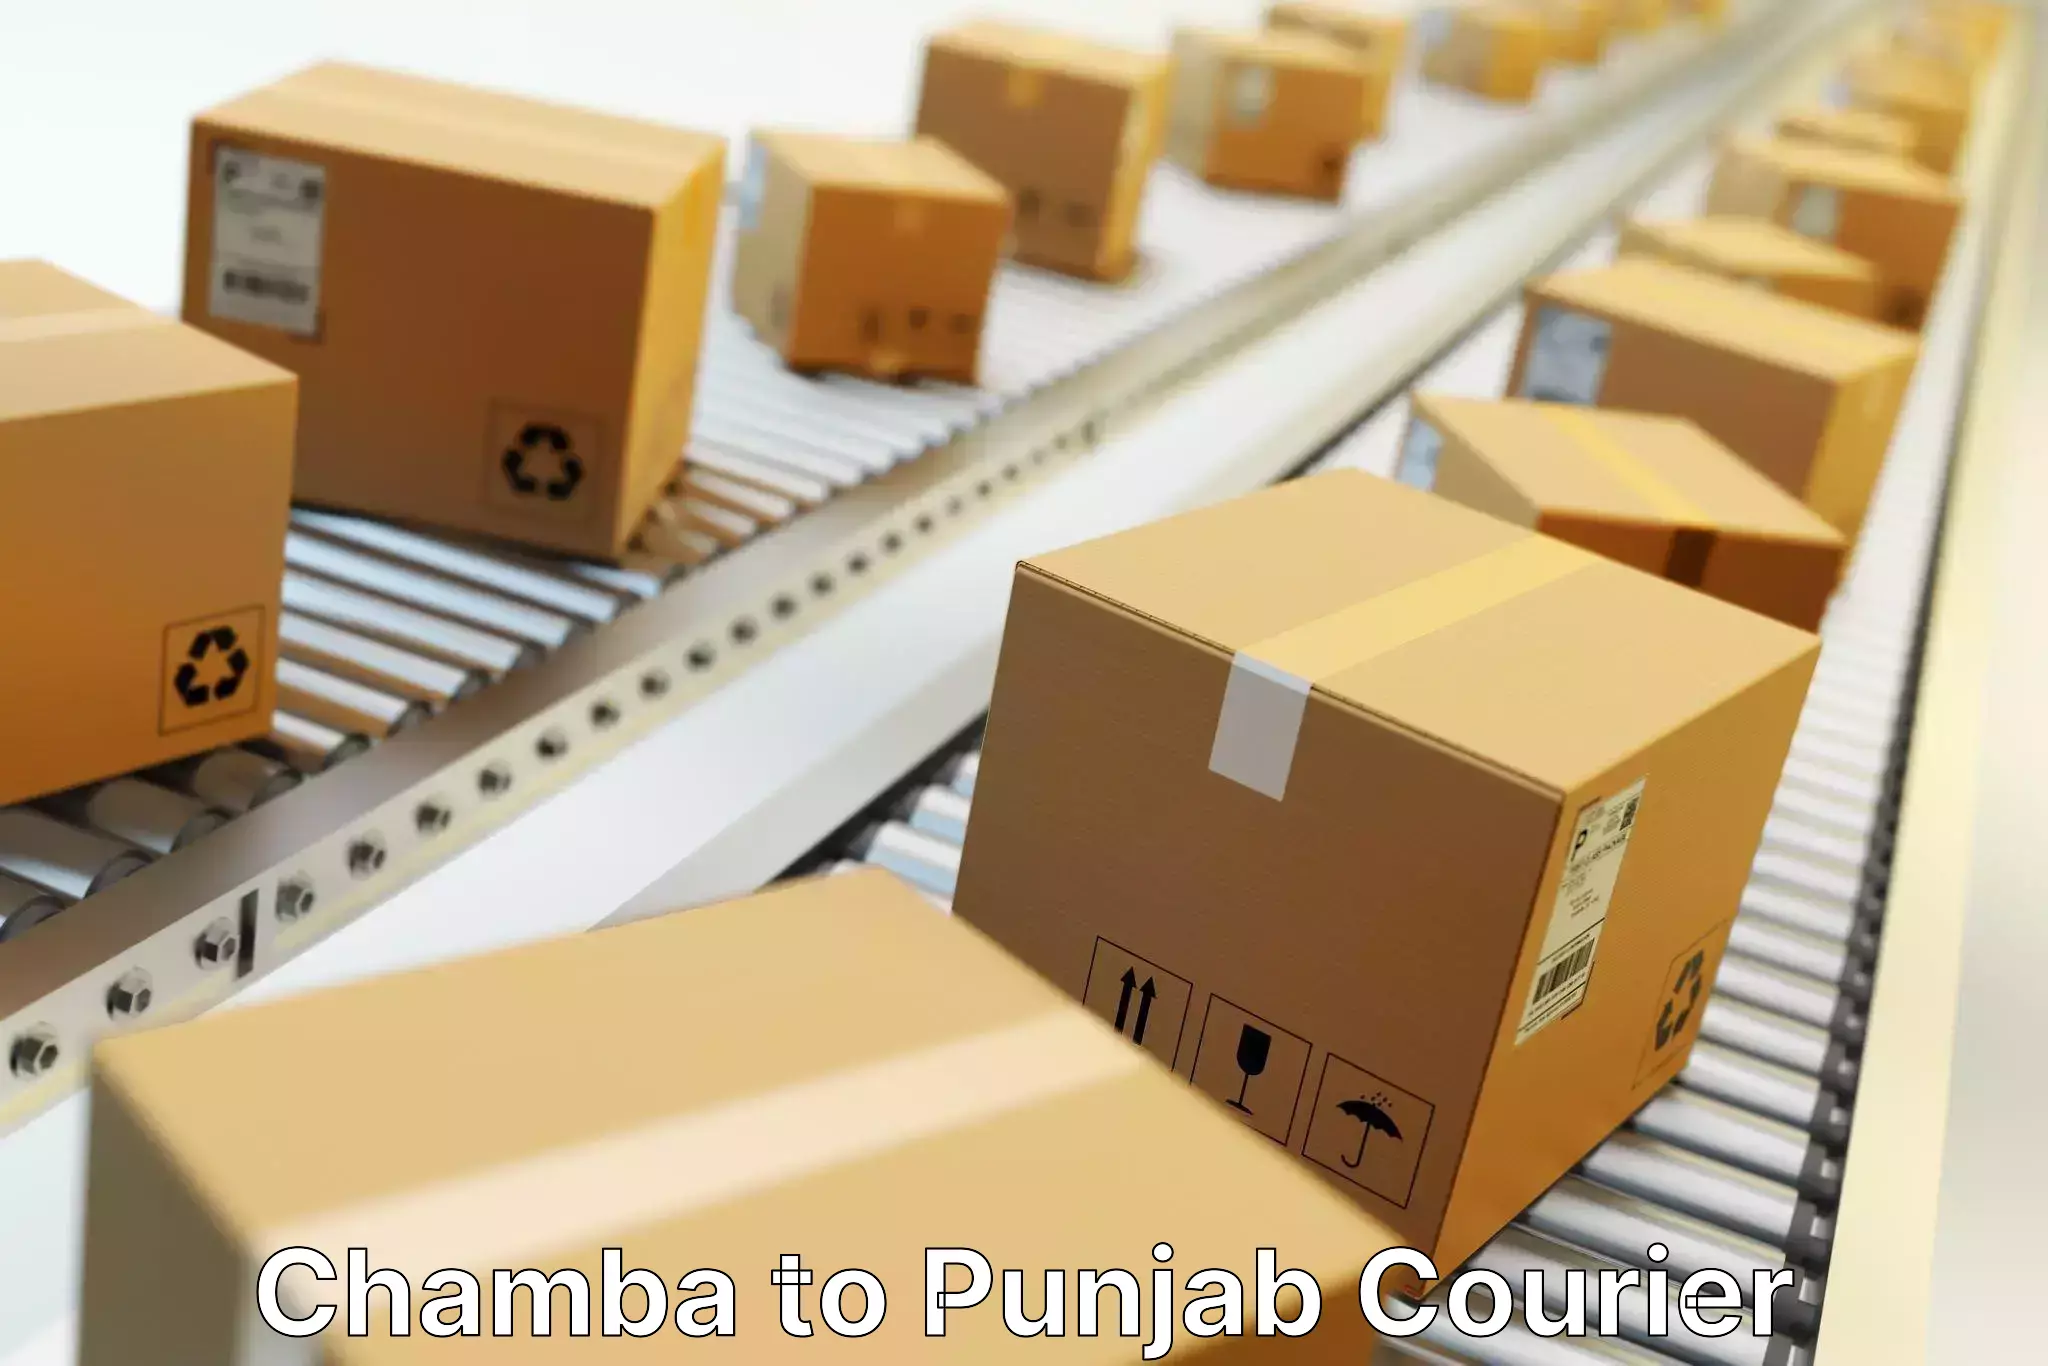 Same-day delivery options Chamba to Amritsar